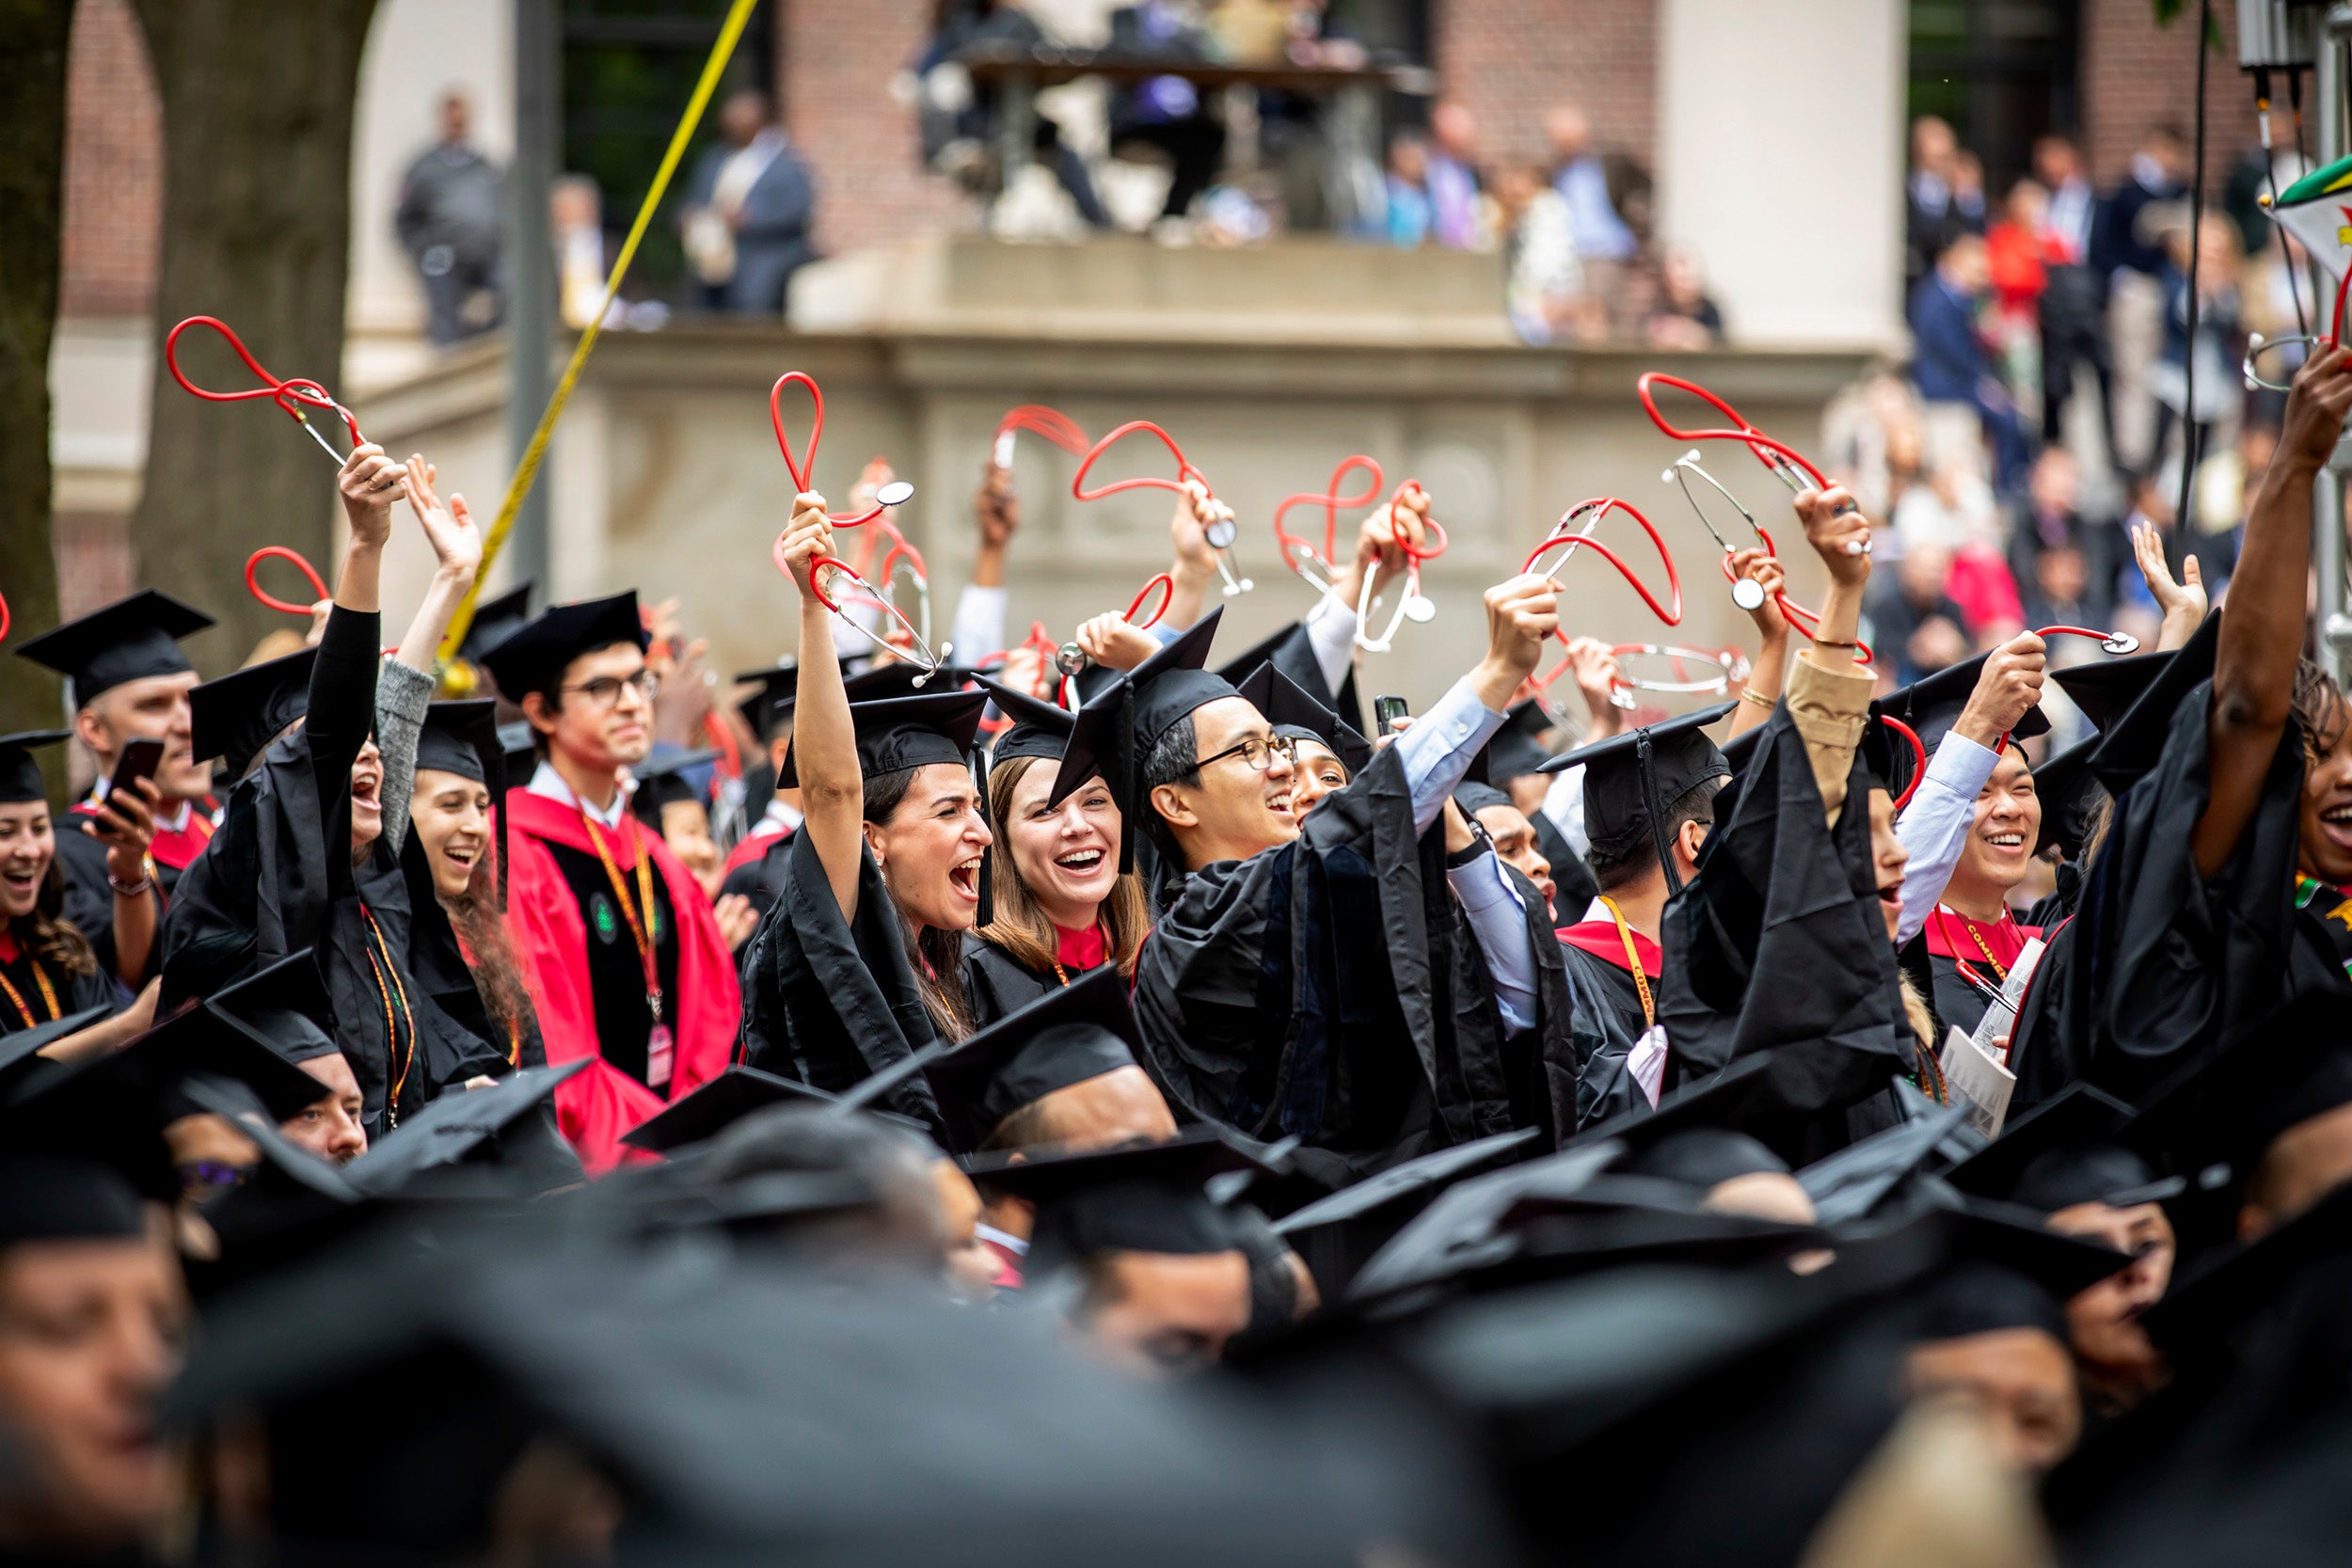 Graduates from Harvard Medical School wave stethoscopes in the air.